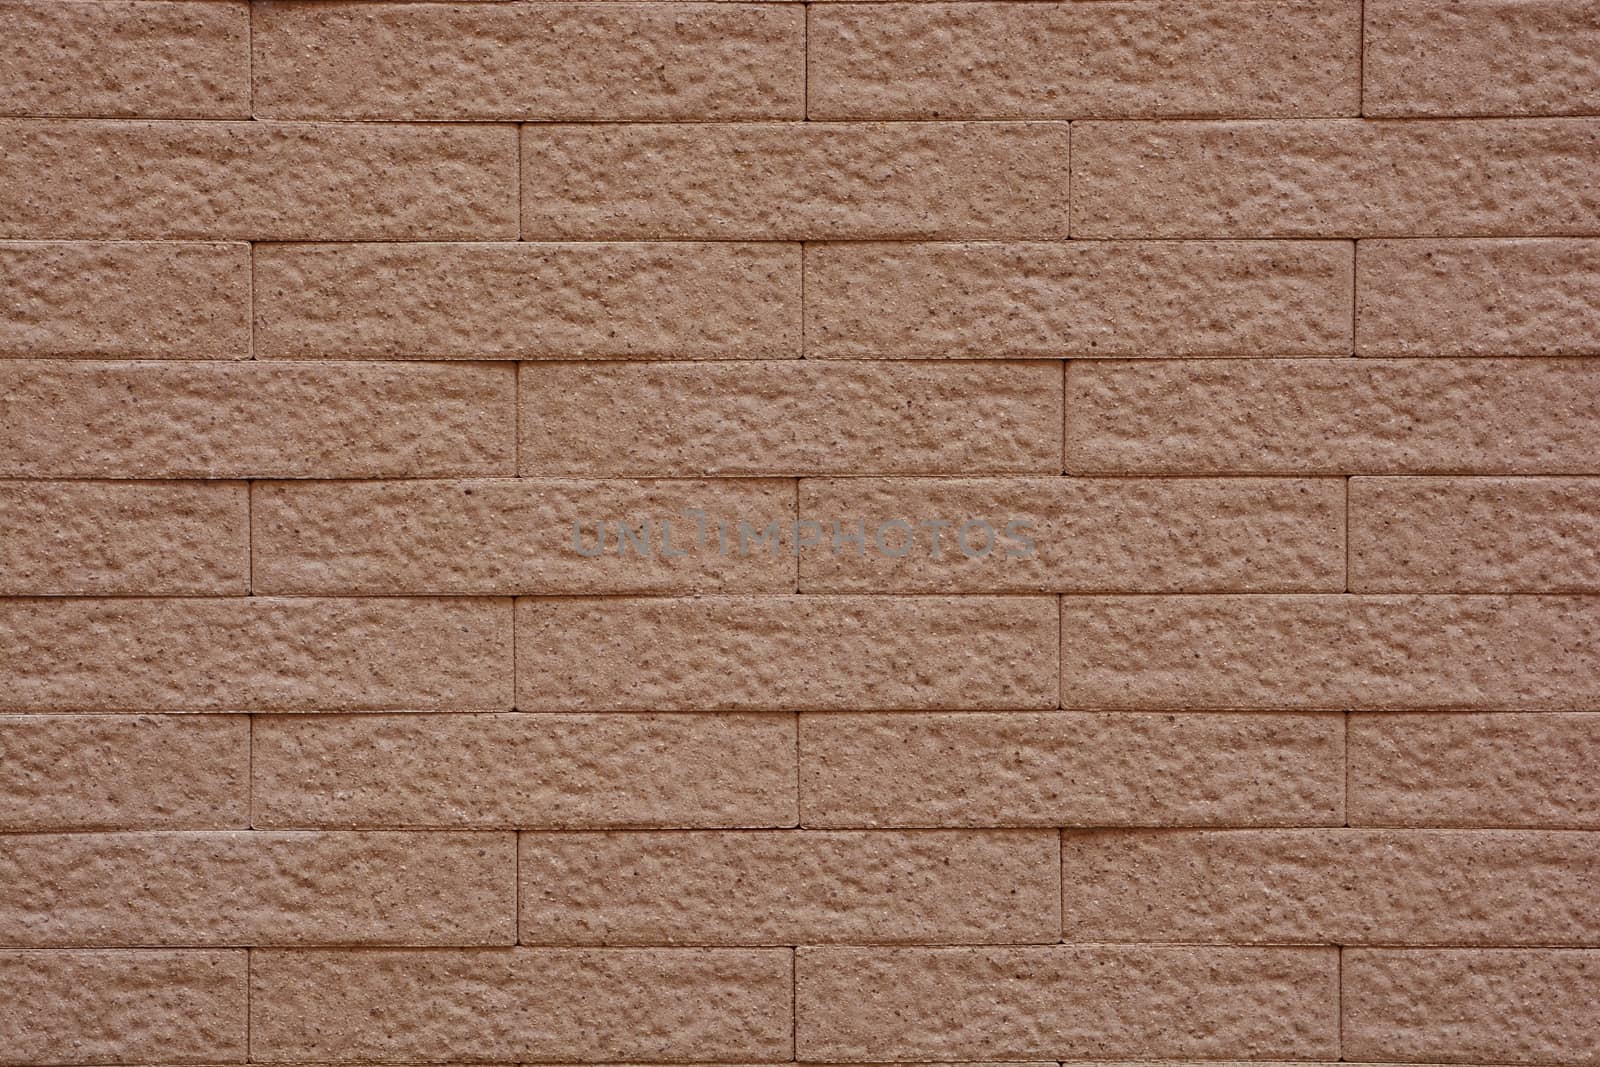 background and texture of vintage style decorative brown brick wall